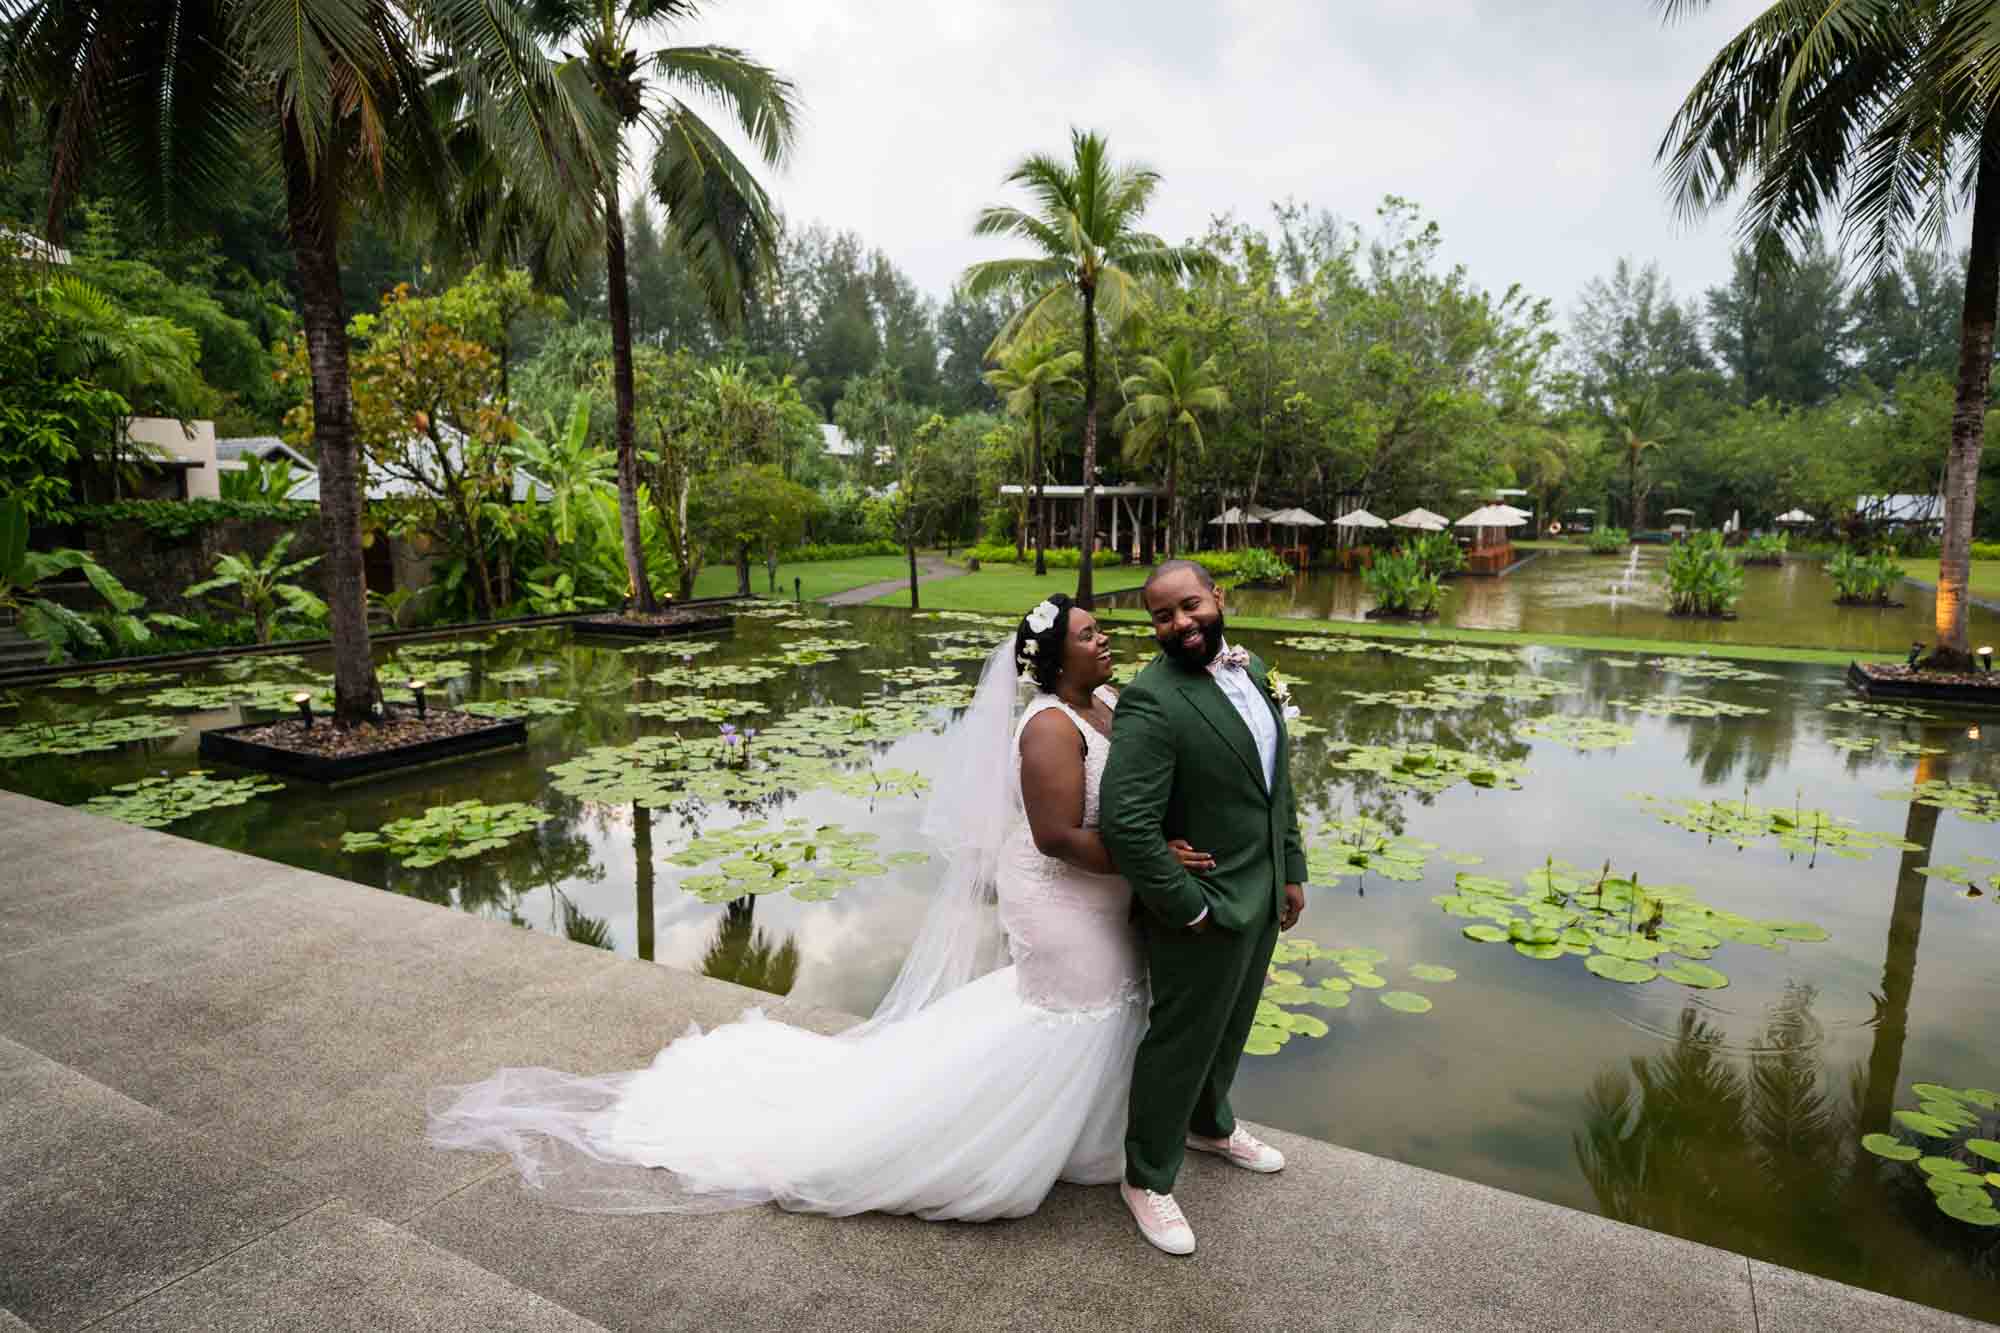 Bride and groom in Thailand for an article on destination wedding planning tips